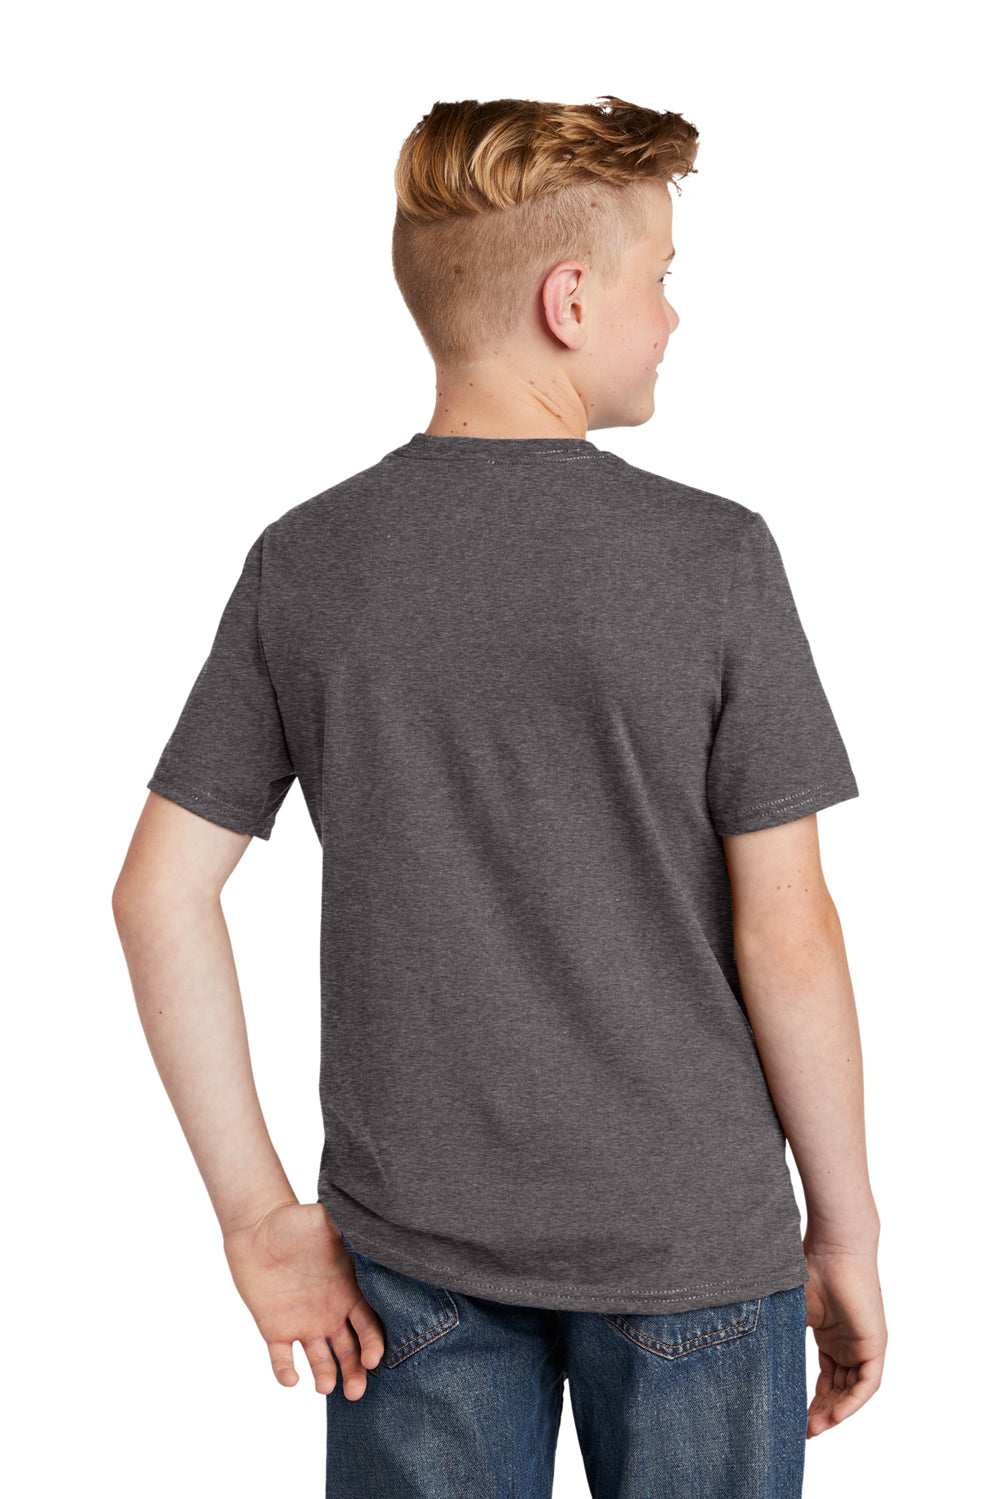 District DT6000Y Youth Very Important Short Sleeve Crewneck T-Shirt Heather Charcoal Grey Back